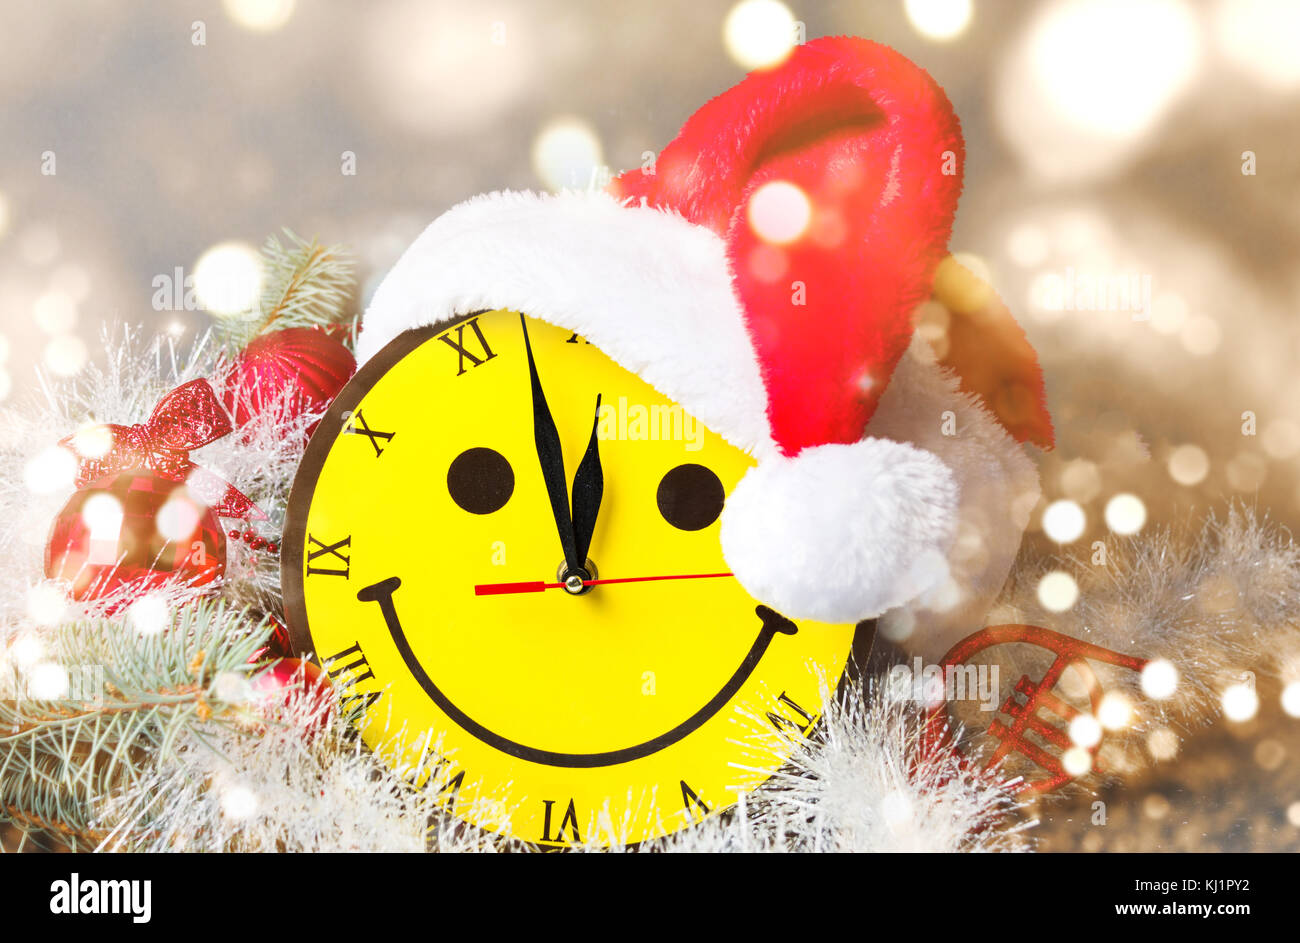 Smiley face clock and Sand hat with Christmas decorations Stock Photo